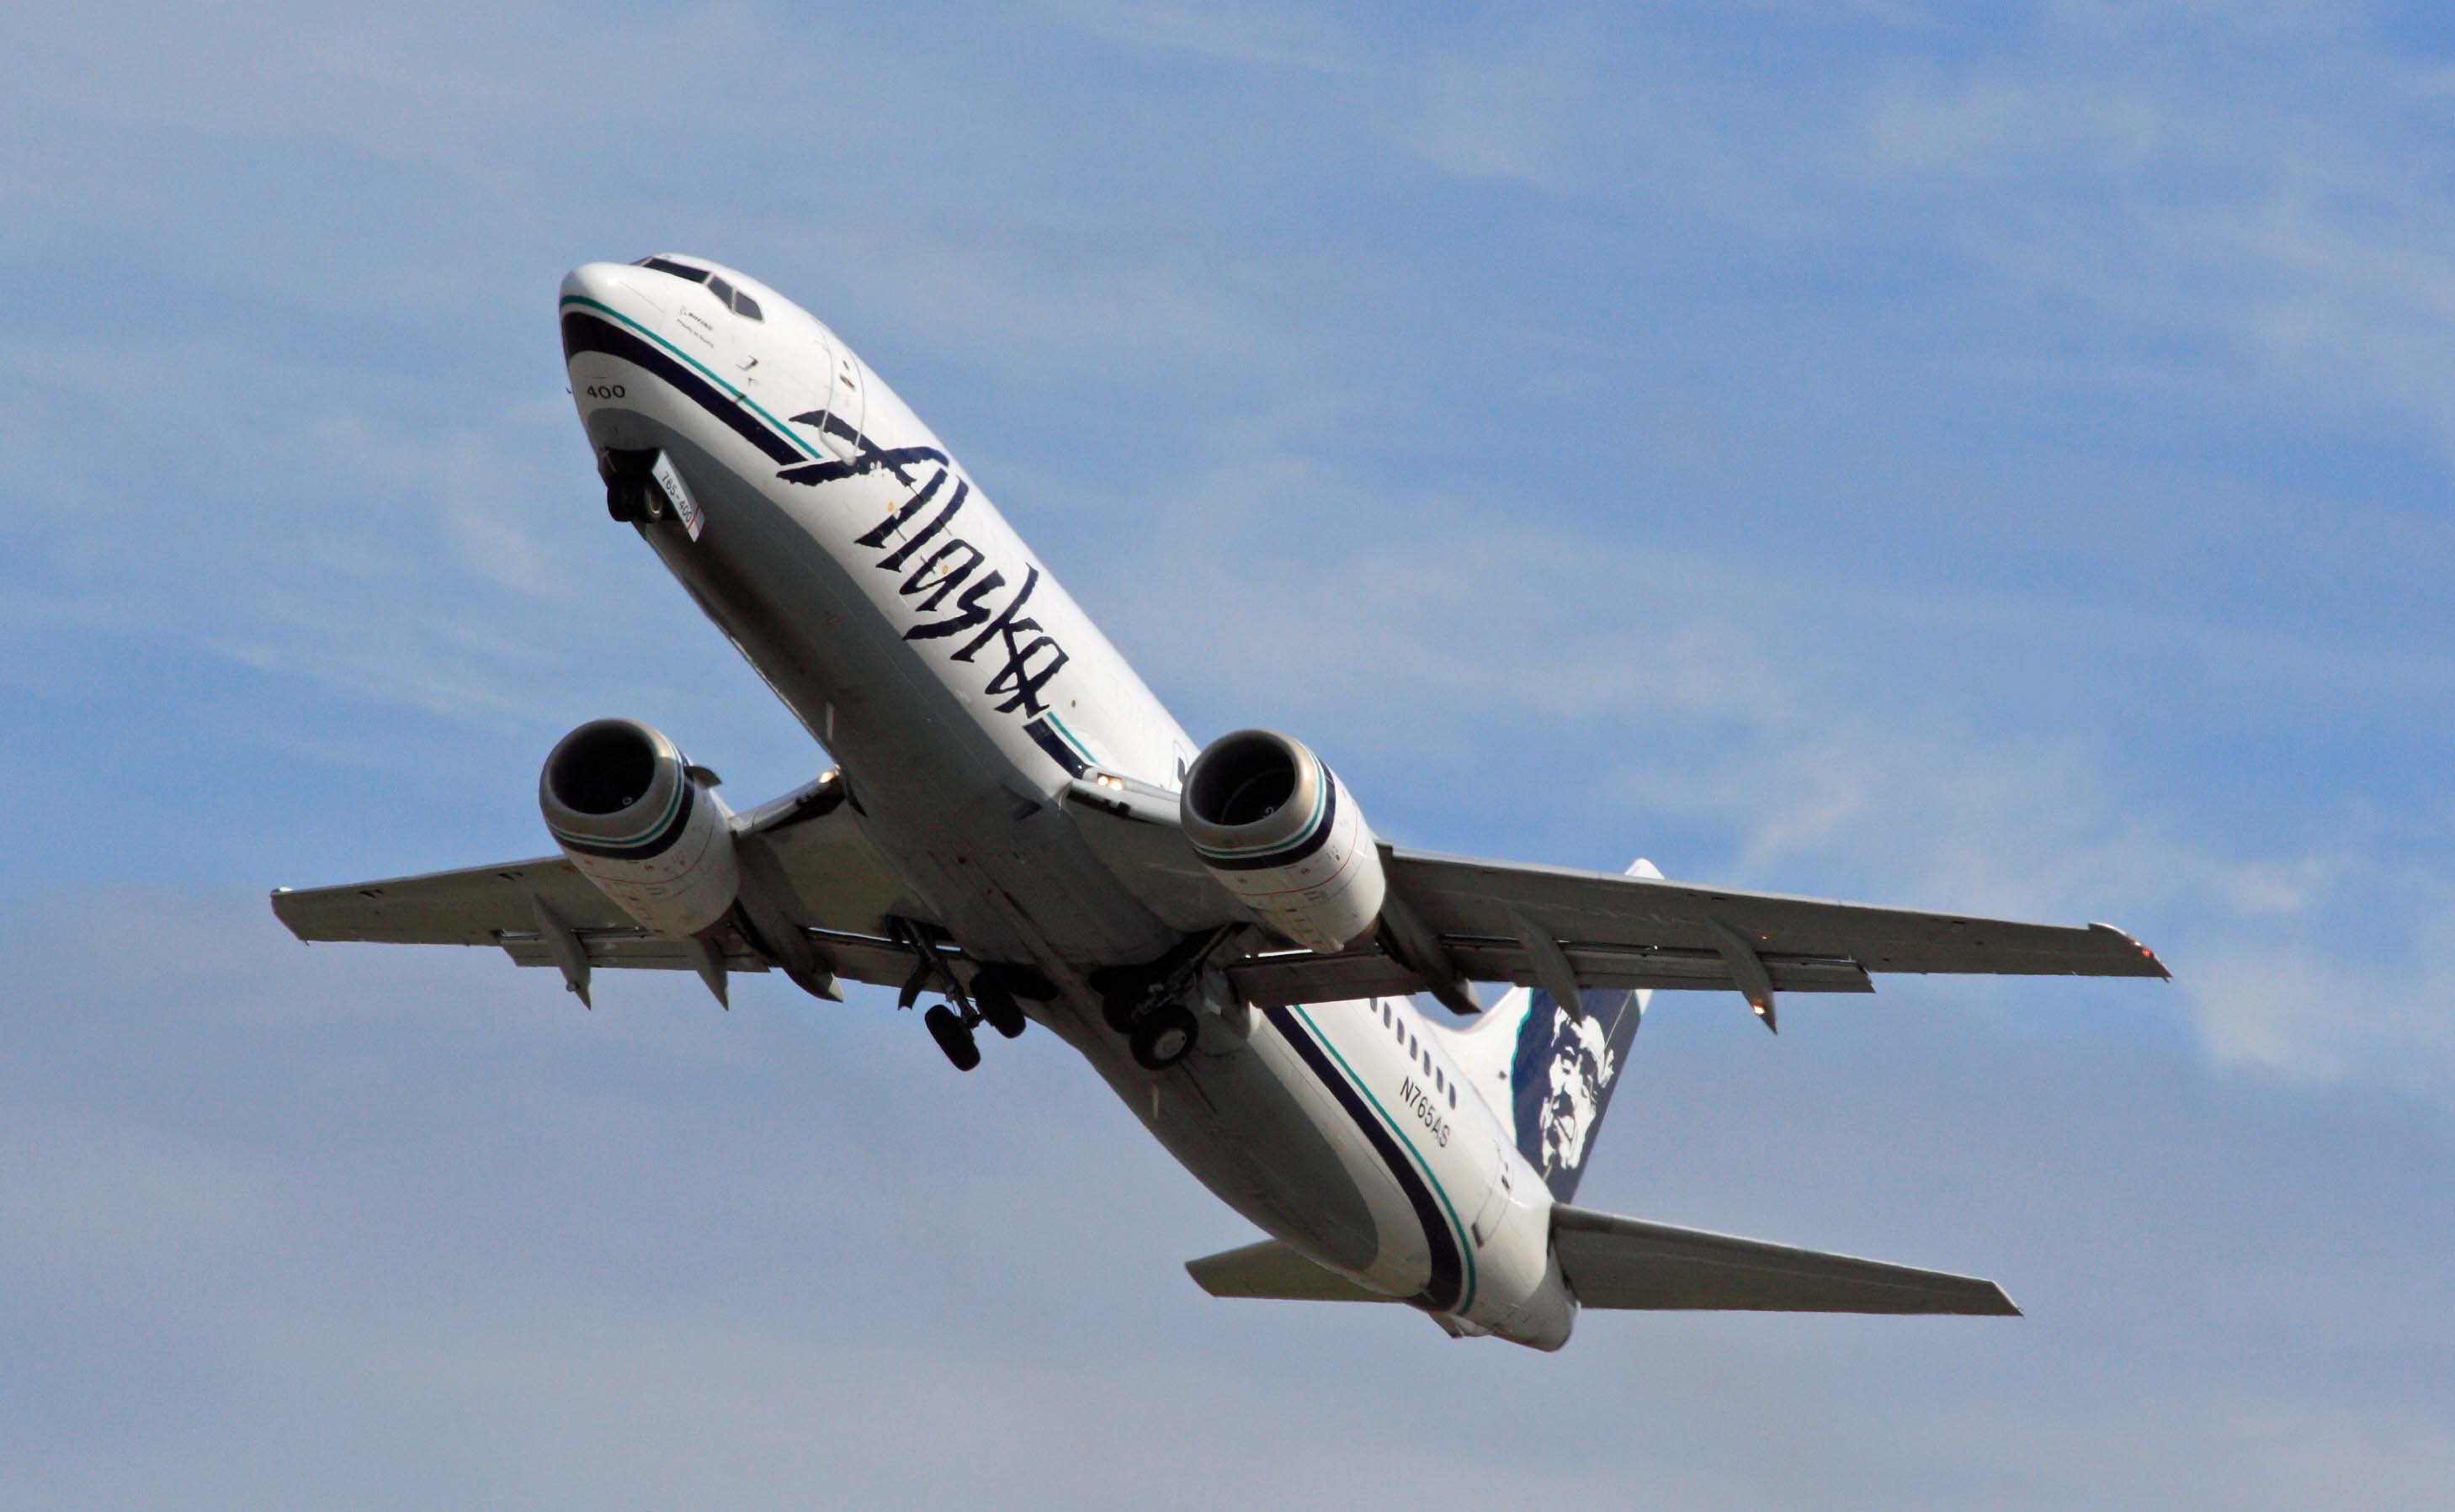 Our work horse, an Alaska Airlines 737, lifting off from ANC (6479964435)